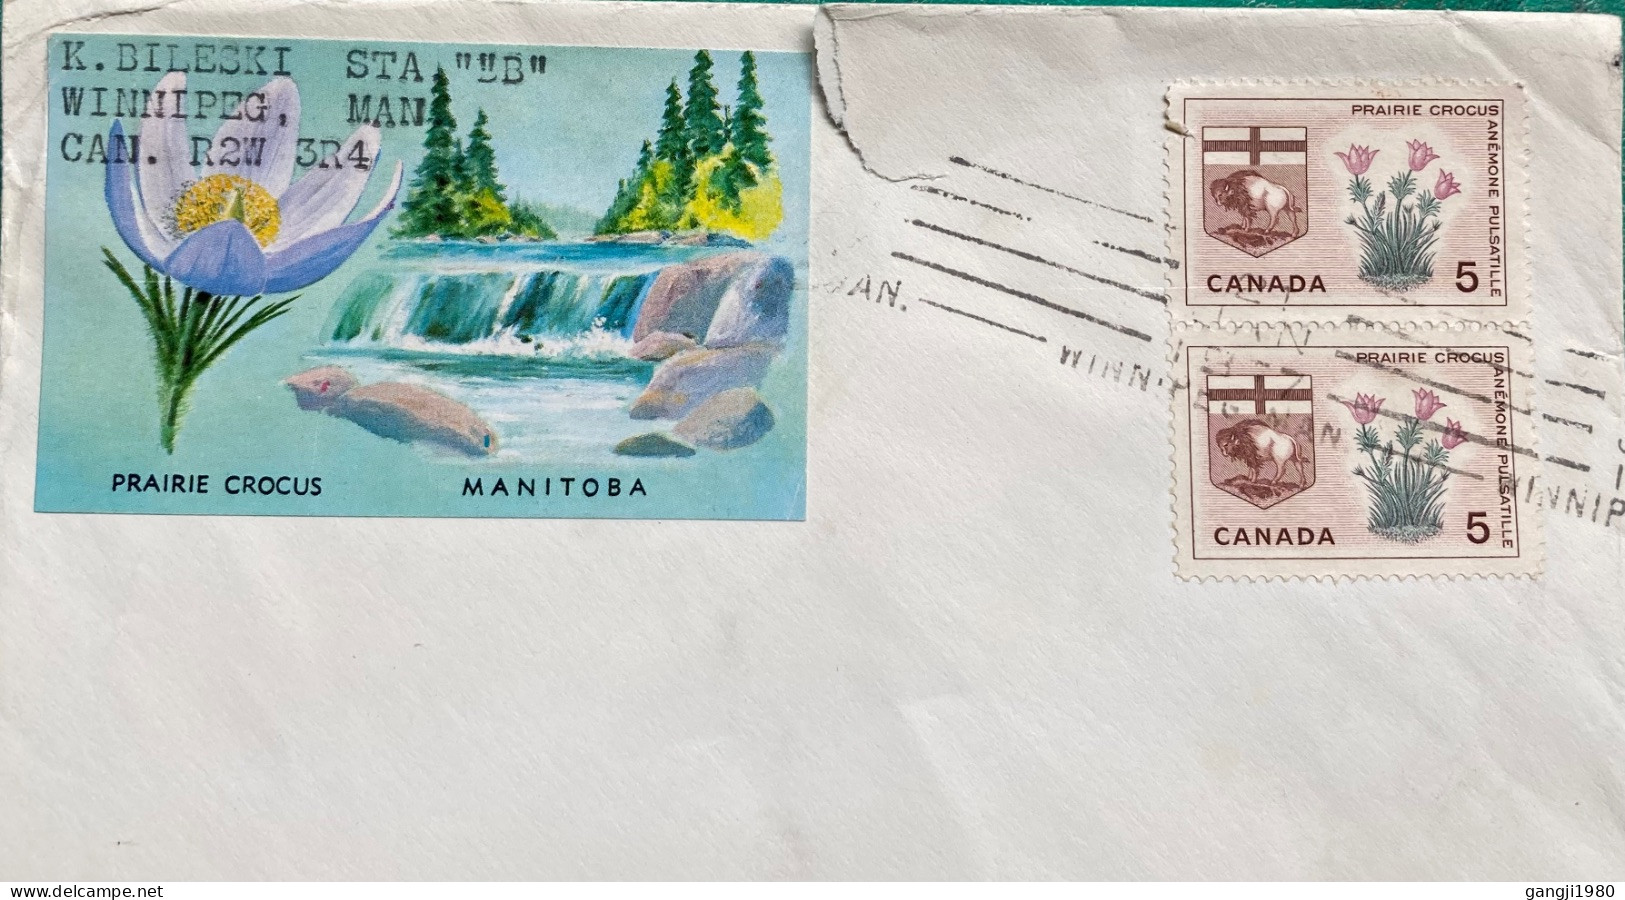 CANADA 1967, COVER USD TO USA, PROVINCE BADLE FLOWER, ANIMAL, NATURE, WATERFALL, 2 STAMP, WINNIPG CITY, BAR CANCEL. - Brieven En Documenten